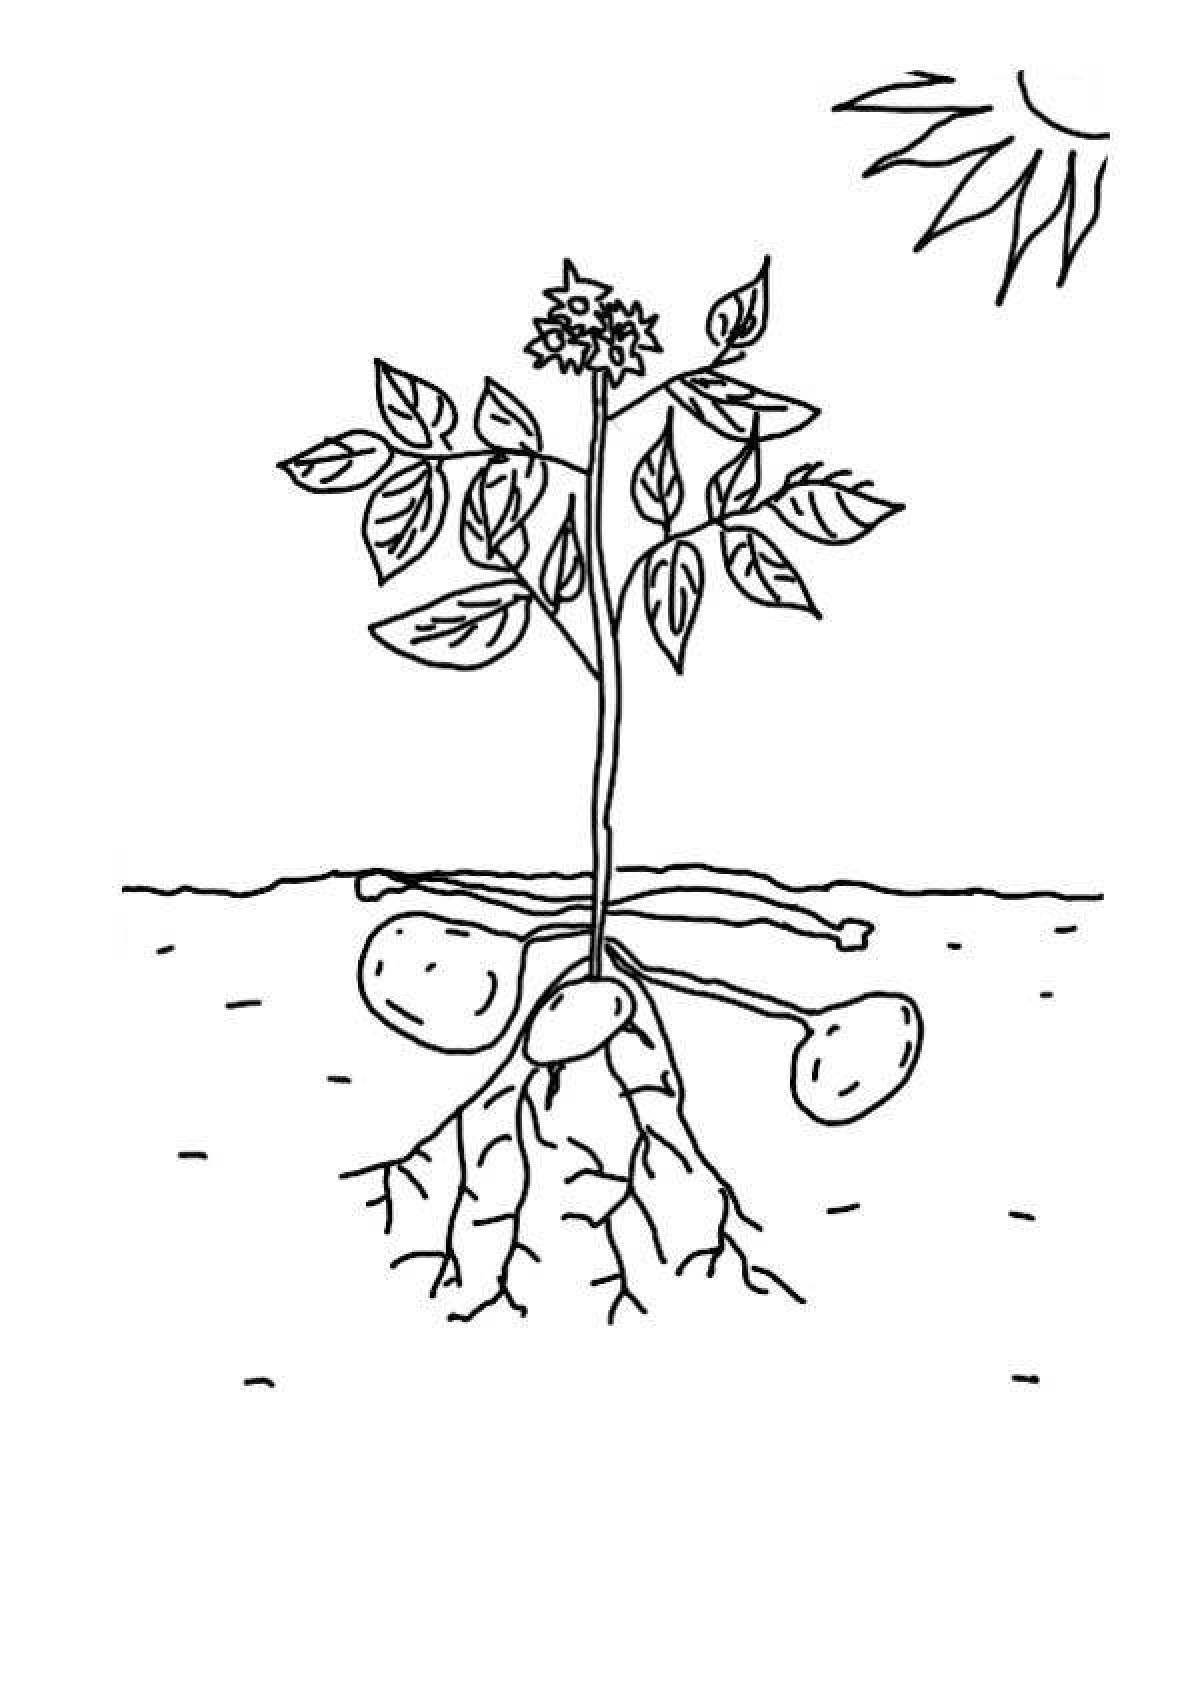 Coloring page magical parts of plants